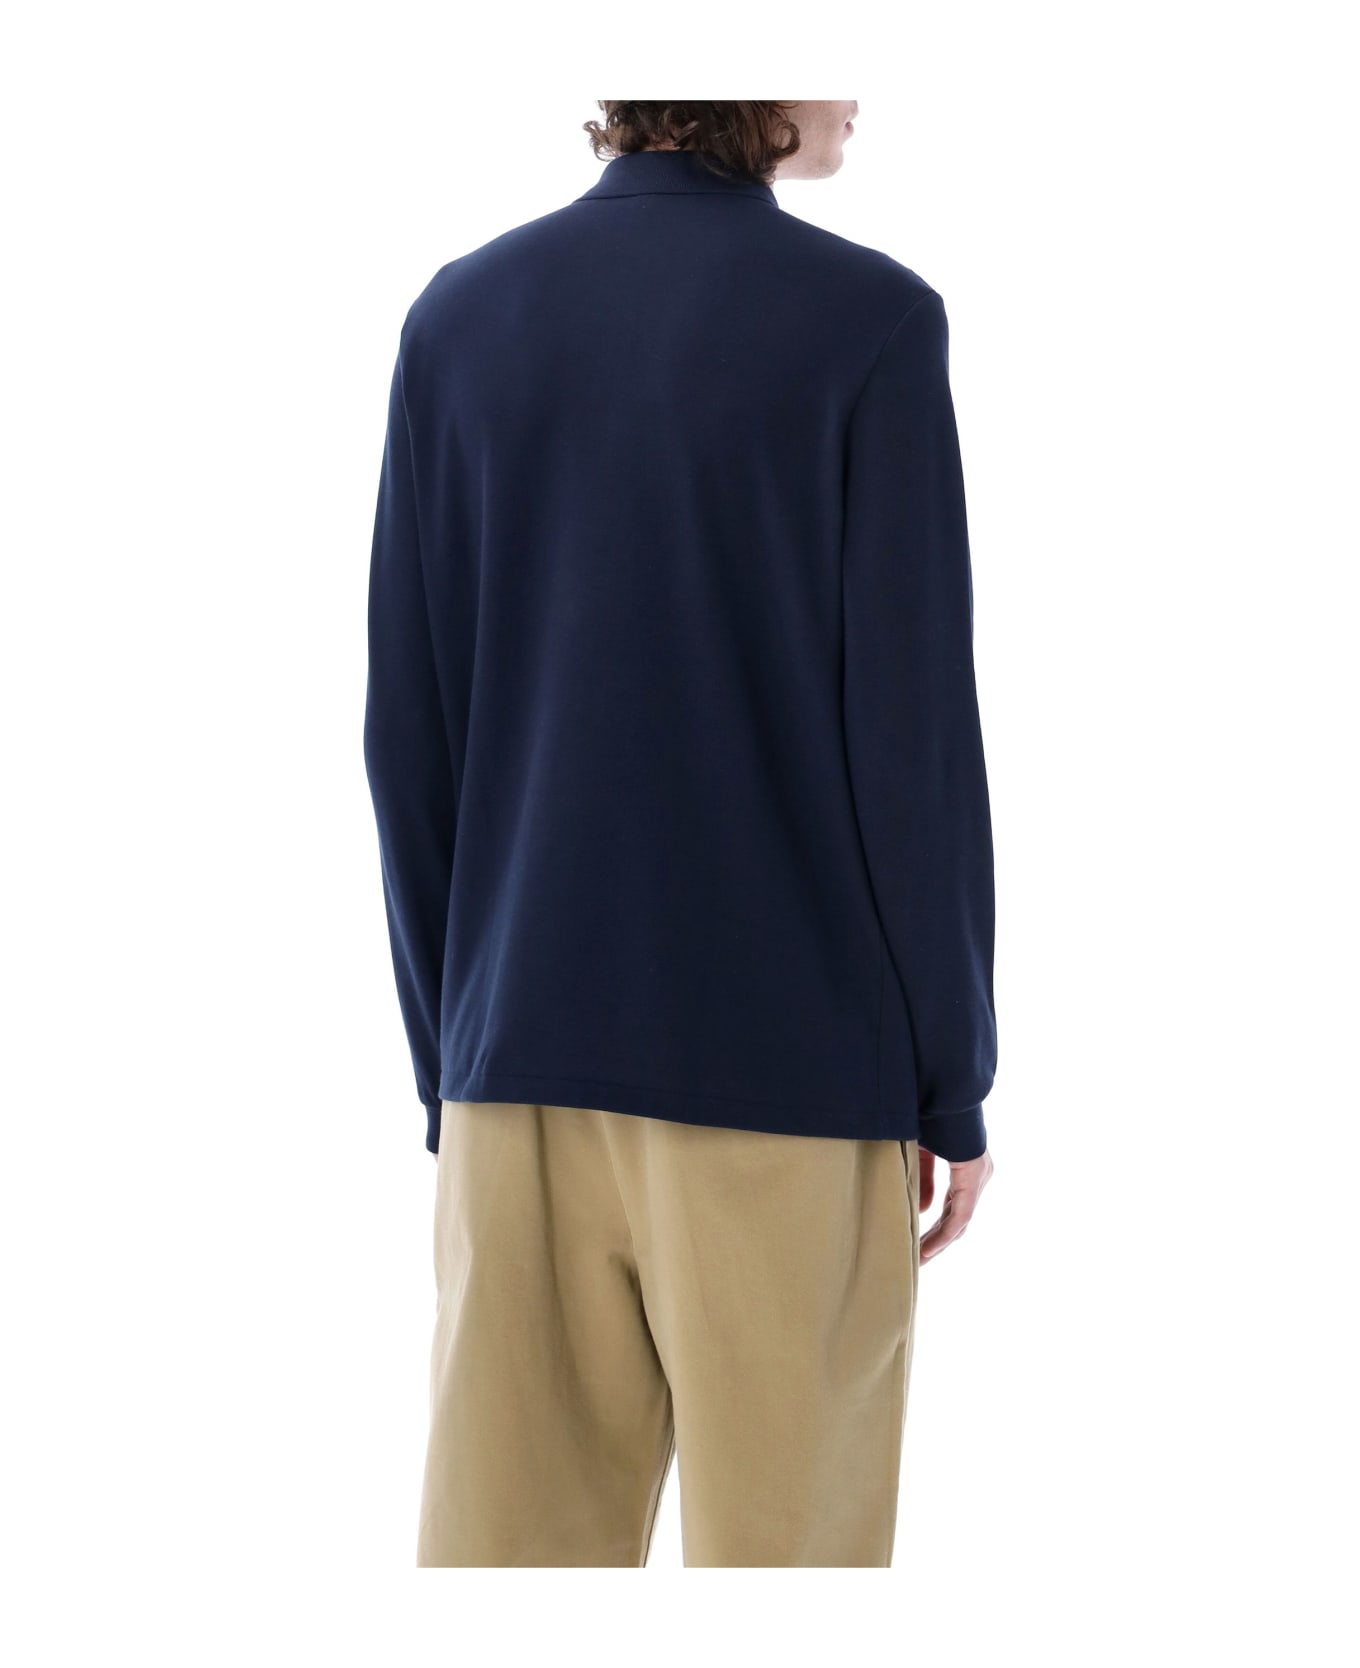 Lacoste Classic Fit L/s Polo Shirt - MARINE ポロシャツ